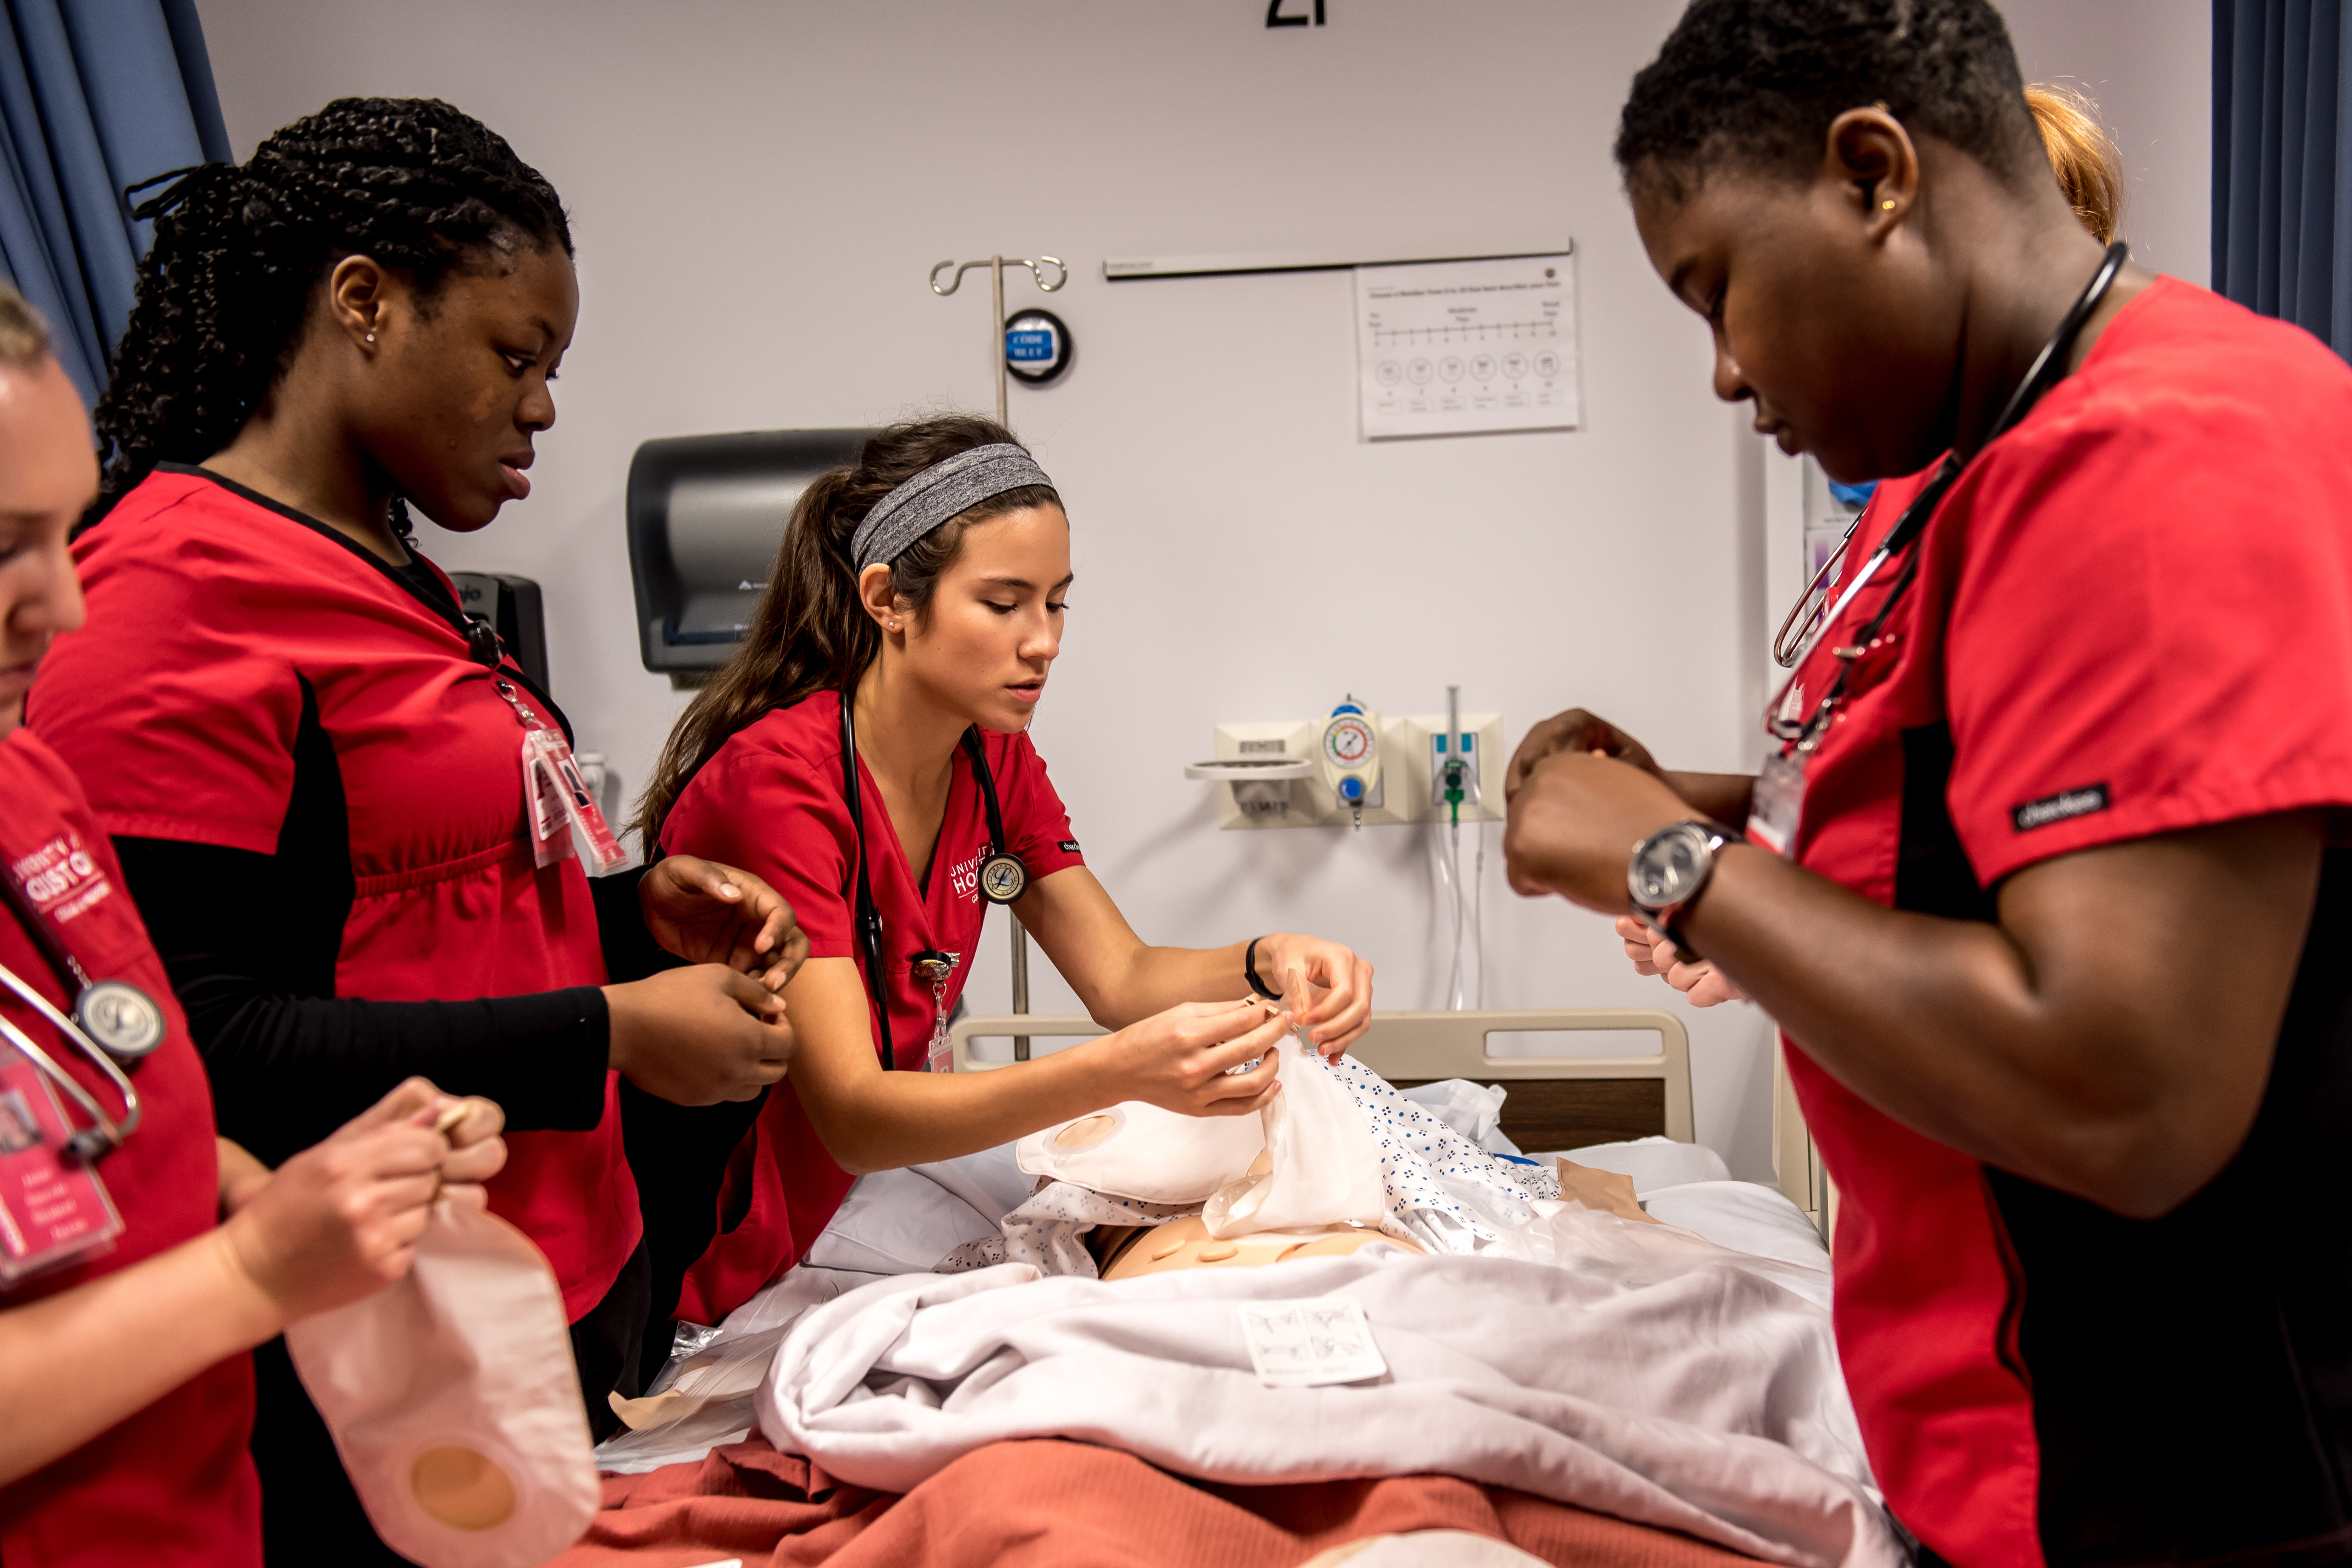 Nurse students praticing on a dummy patient laying in bed